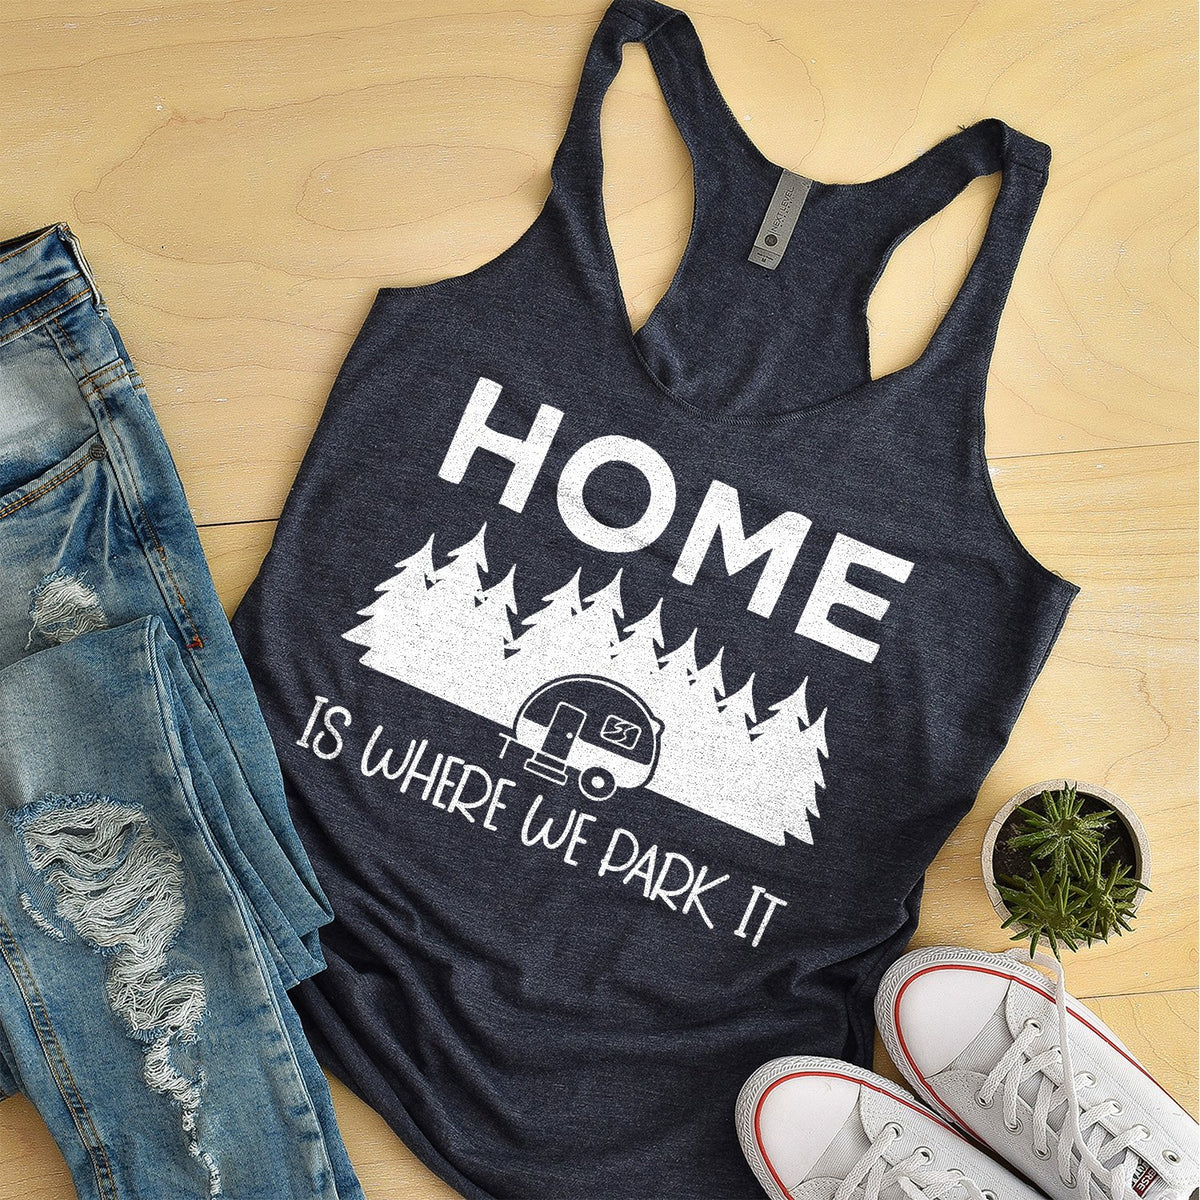 Home Is Where We Park It - Tank Top Racerback